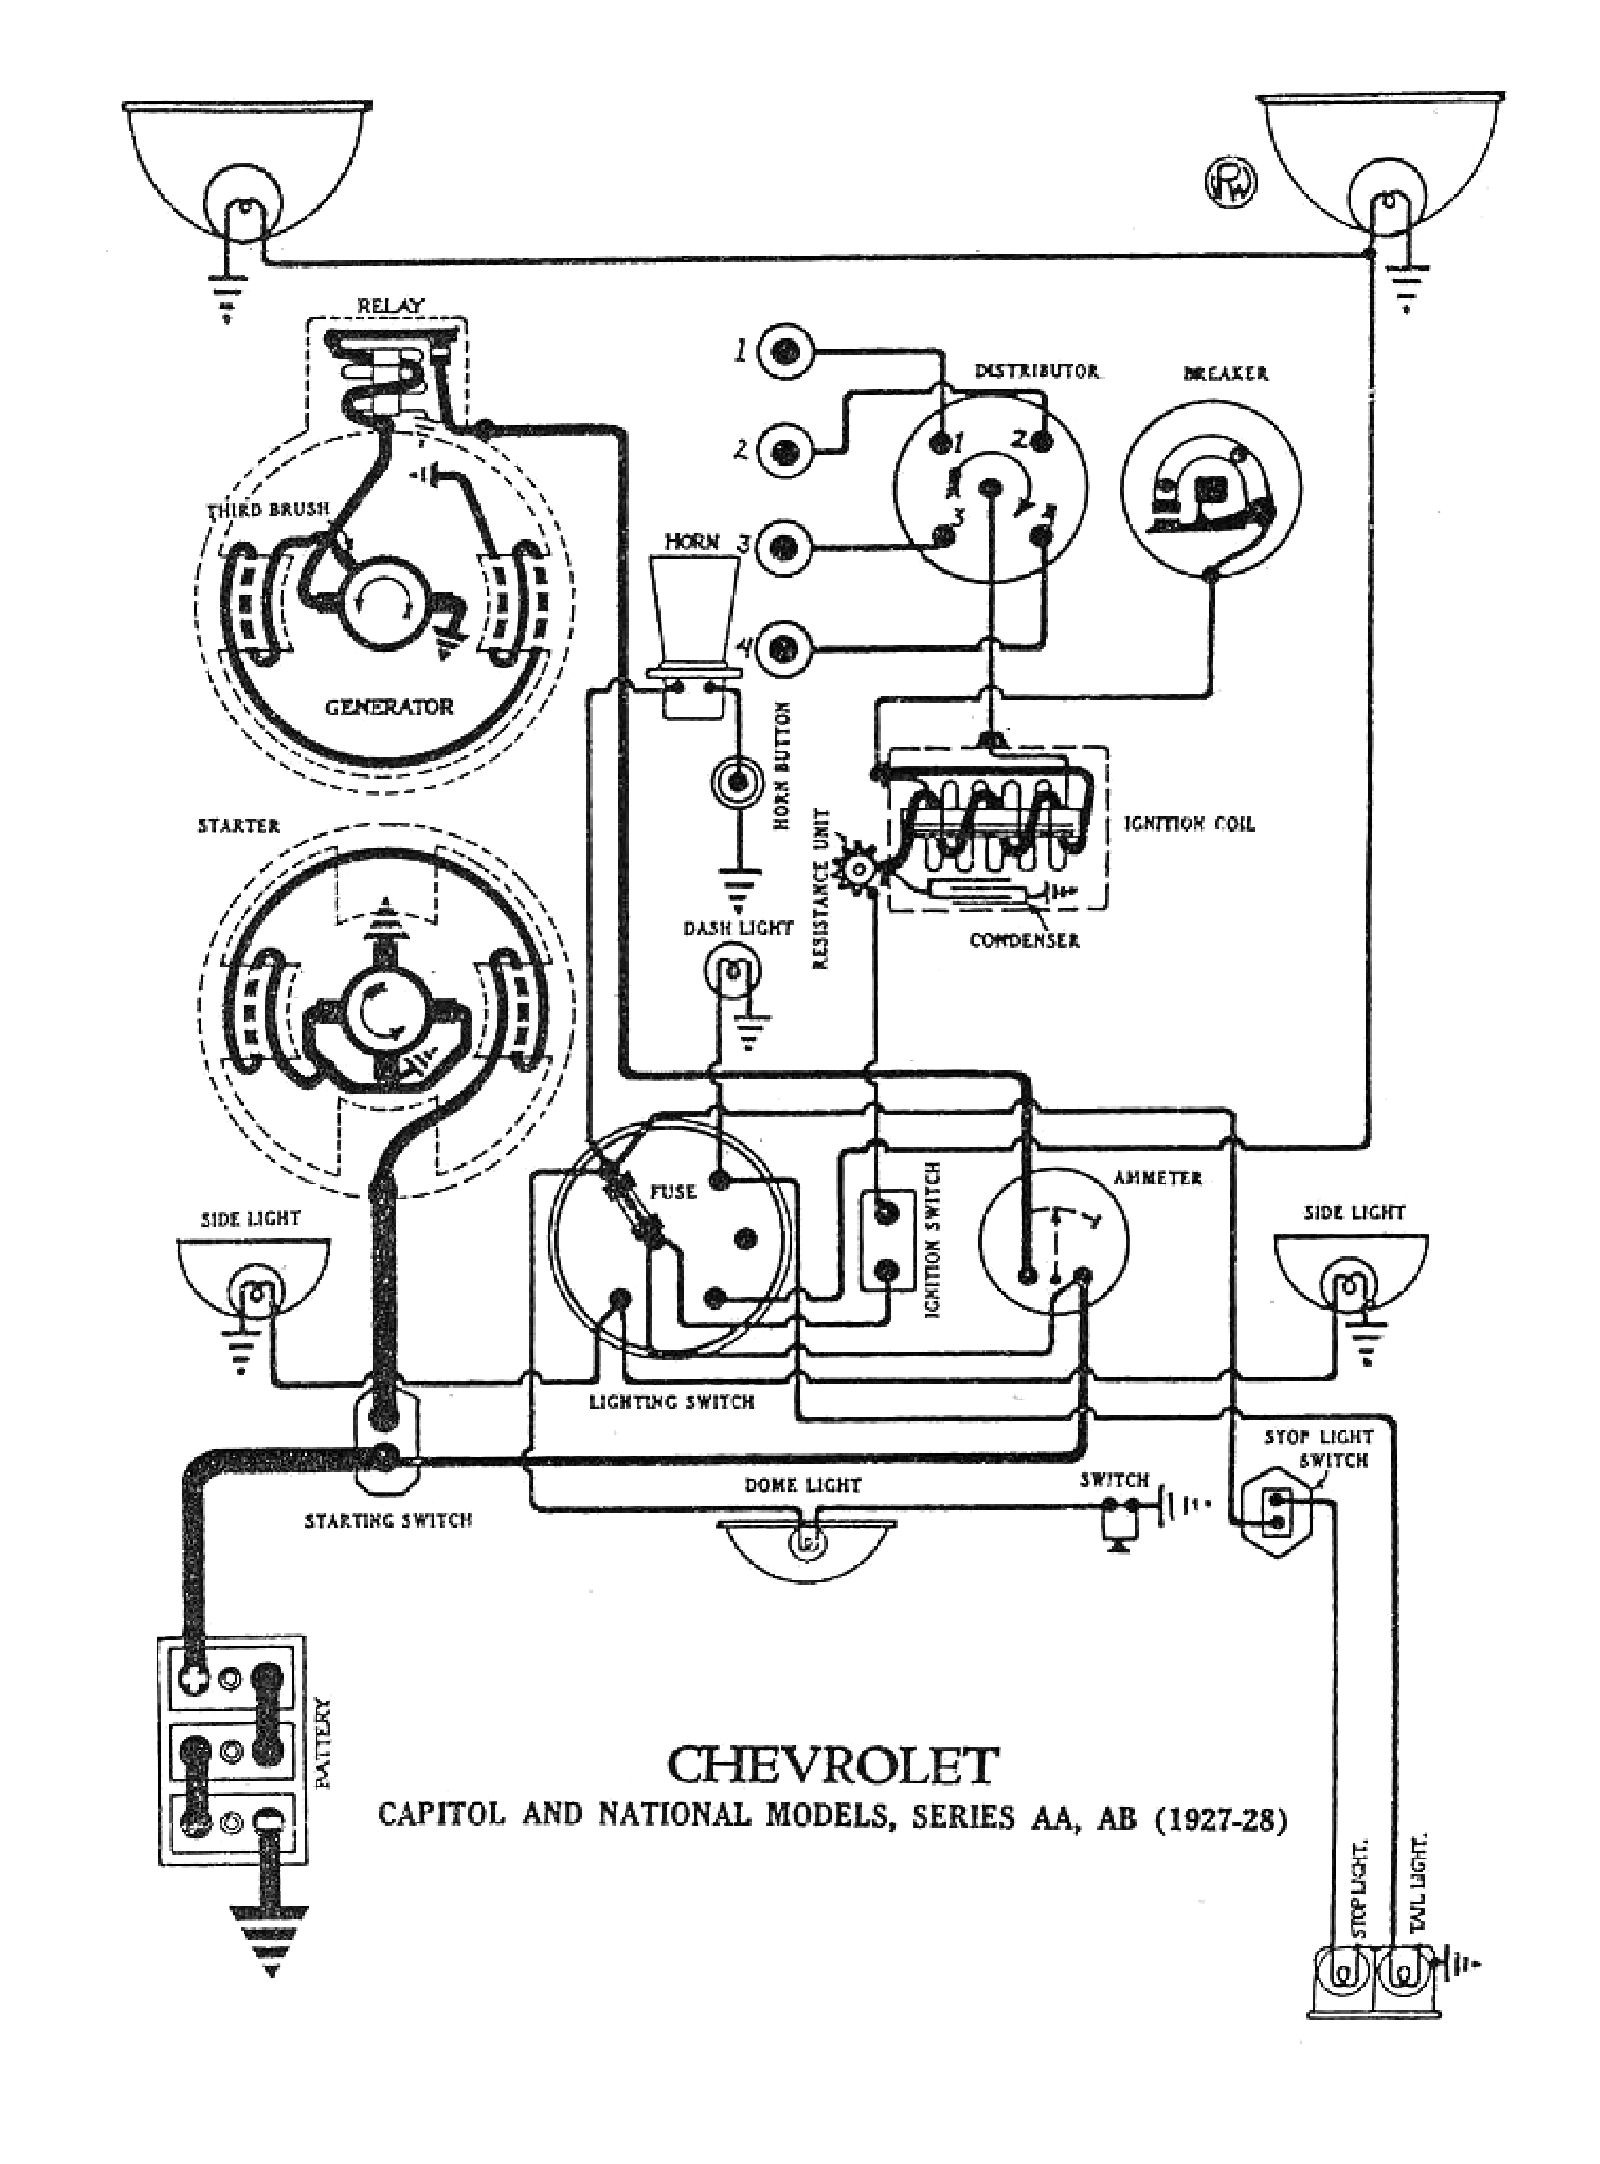 How to Wire A Coil , In A Chev 350 New | Wiring Diagram Image